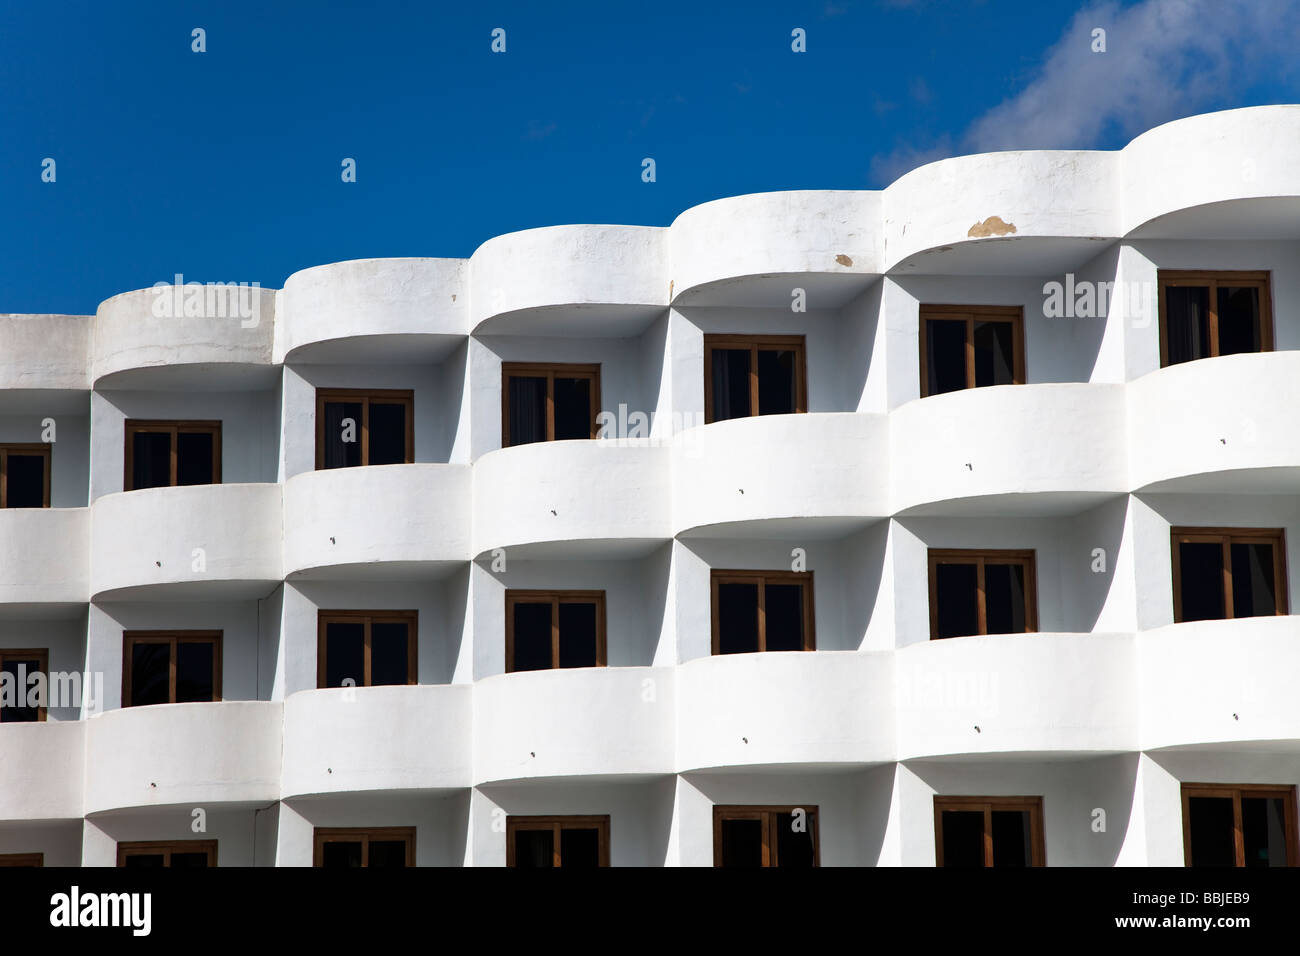 Concrete balconies in modern hotel development in poor condition requiring painting Cala d'Or Mallorca Spain Stock Photo